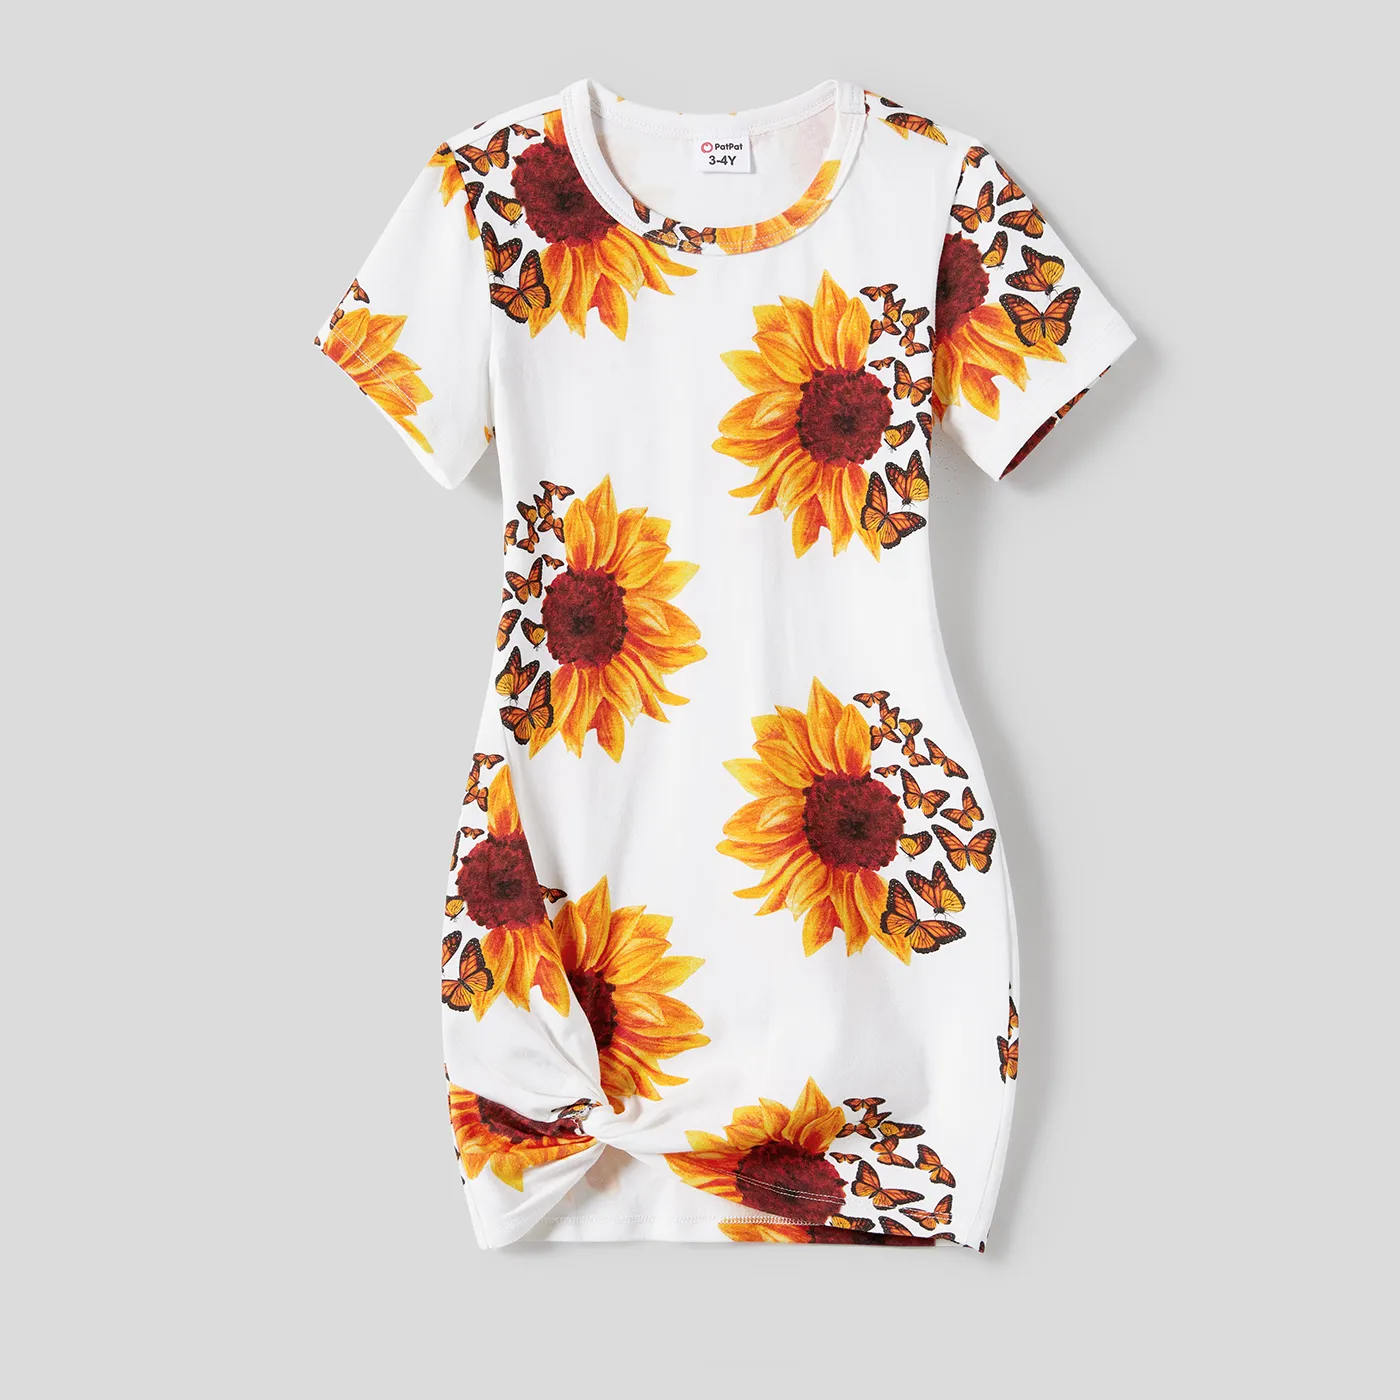 Family Matching Sunflower Print Short-sleeve Dresses and Colorblock Stripe Splice Short-sleeve T-shi